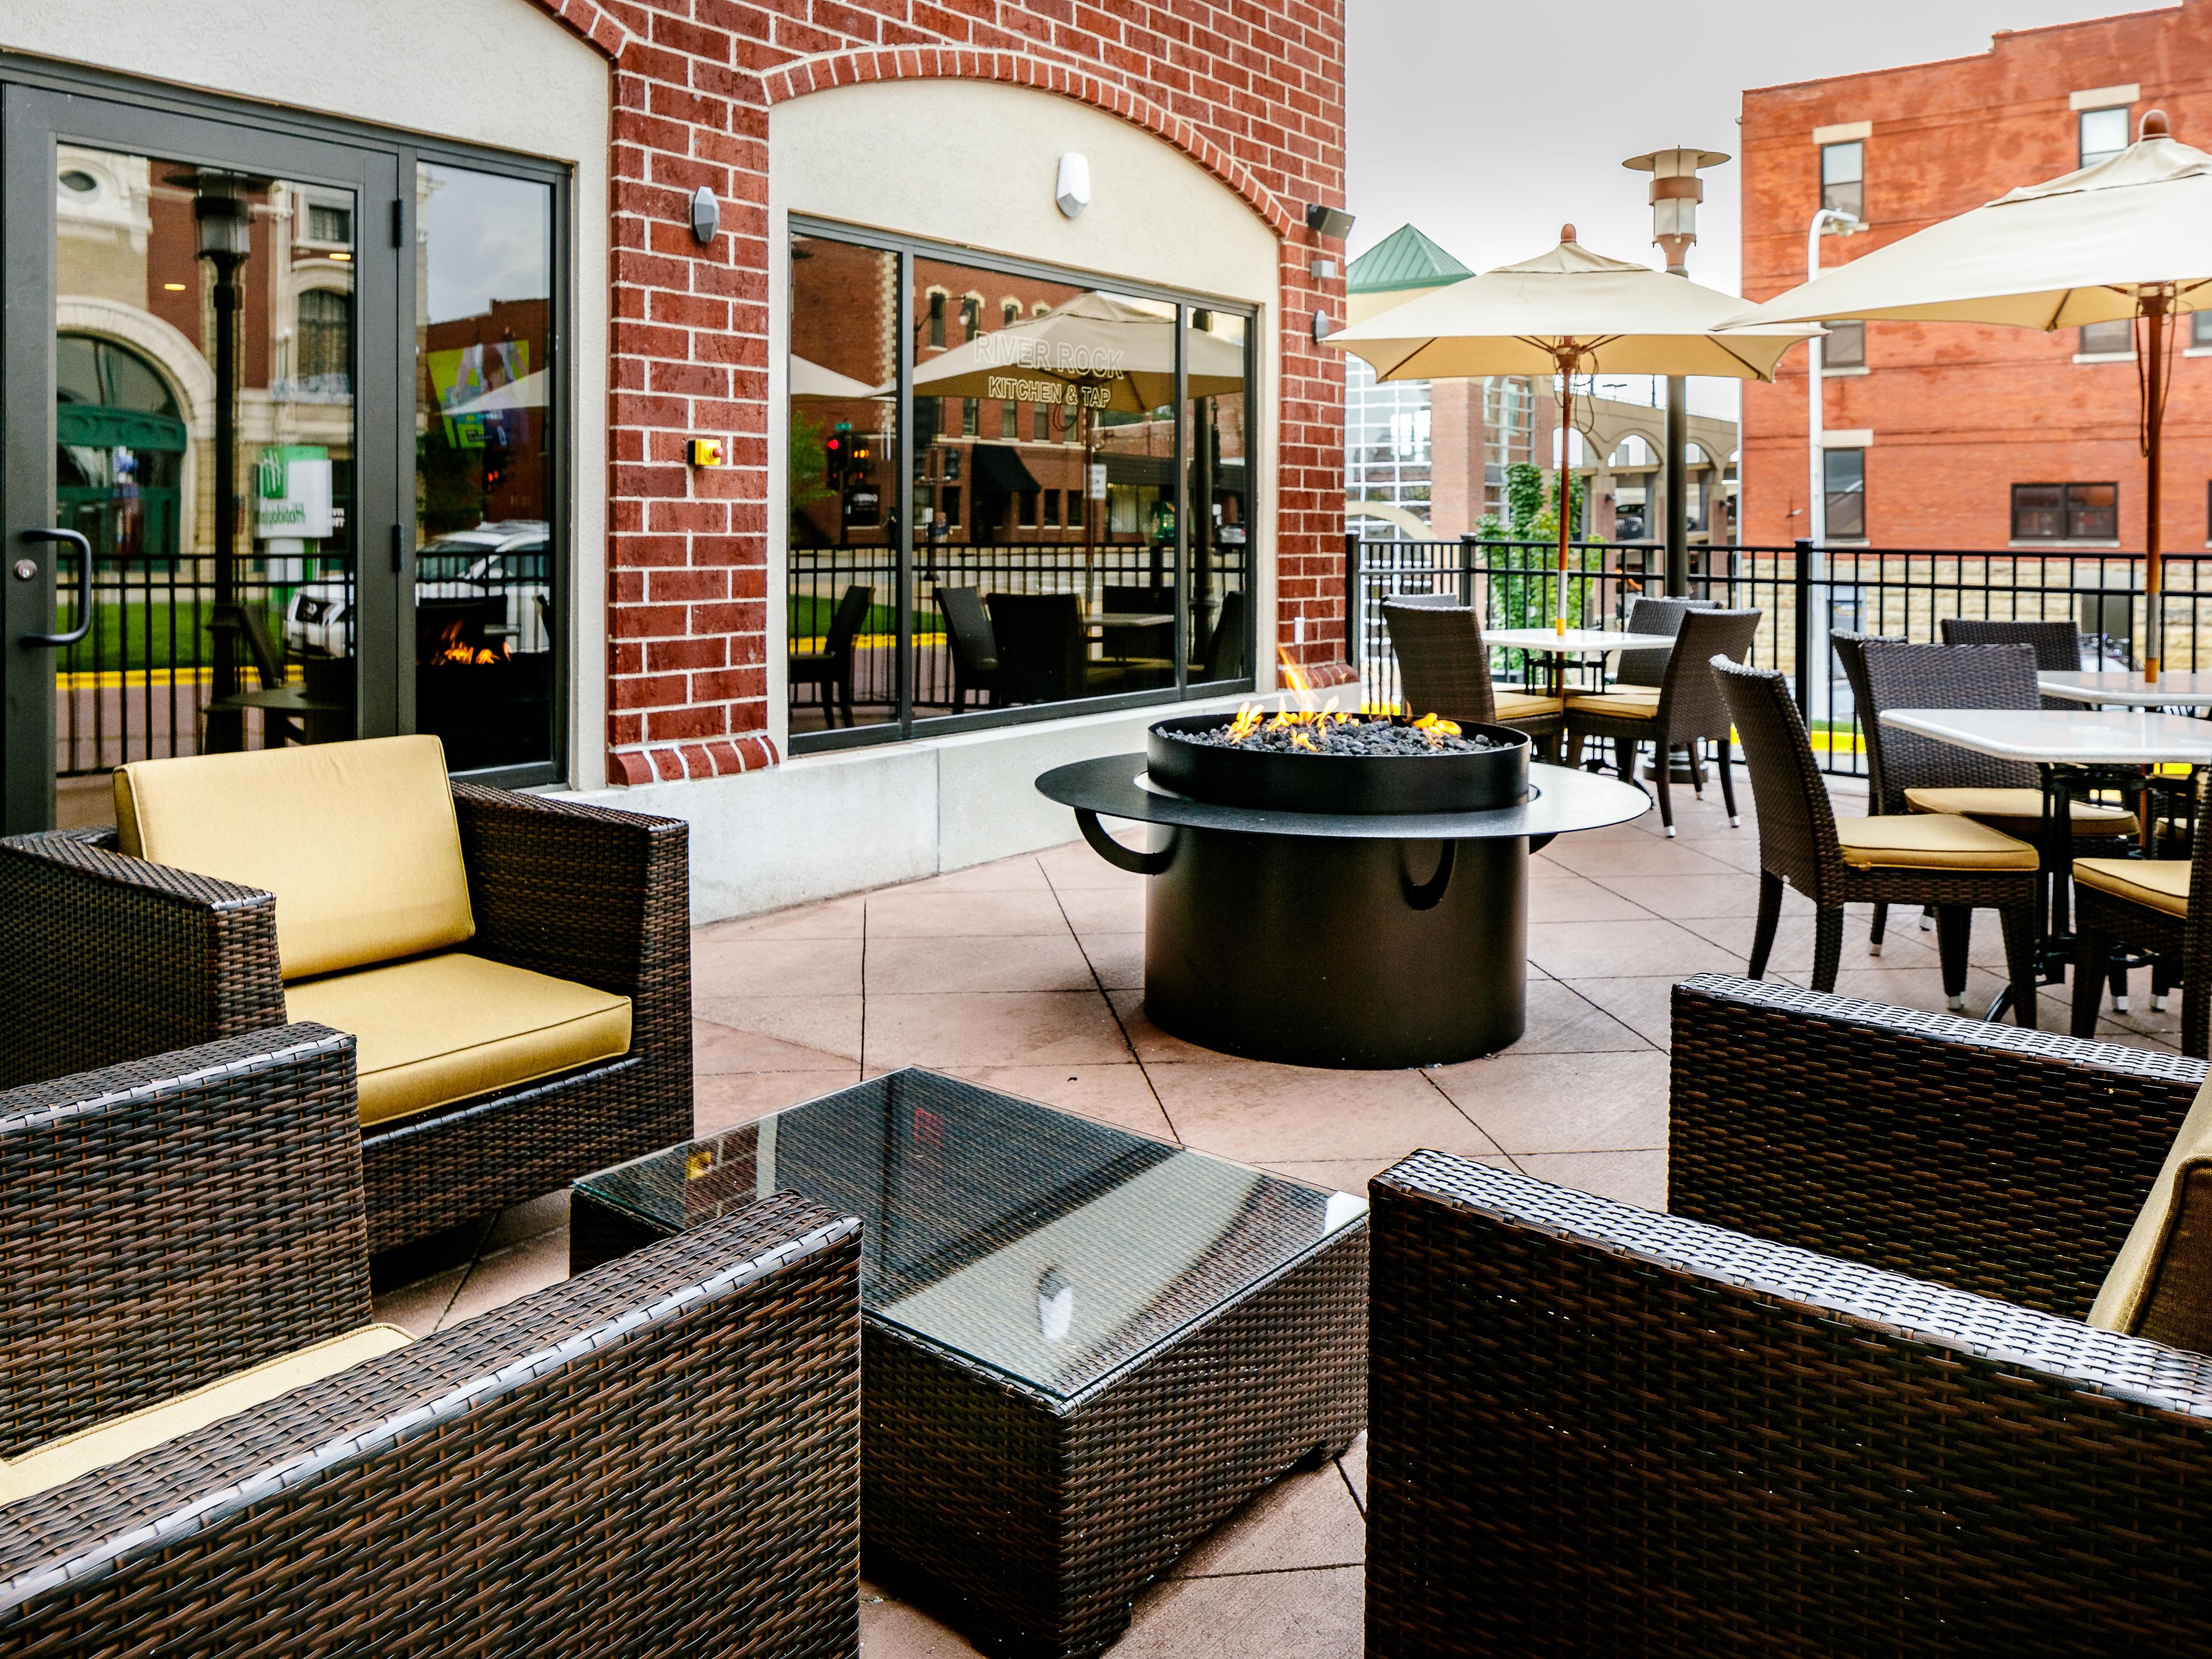 The Holiday Inn's restaurant, River Rock Kitchen and Tap, features a comfortable patio area for dinning with a view of Main Street. You can enjoy our fire pit, sip wine, or just watch the people go by.